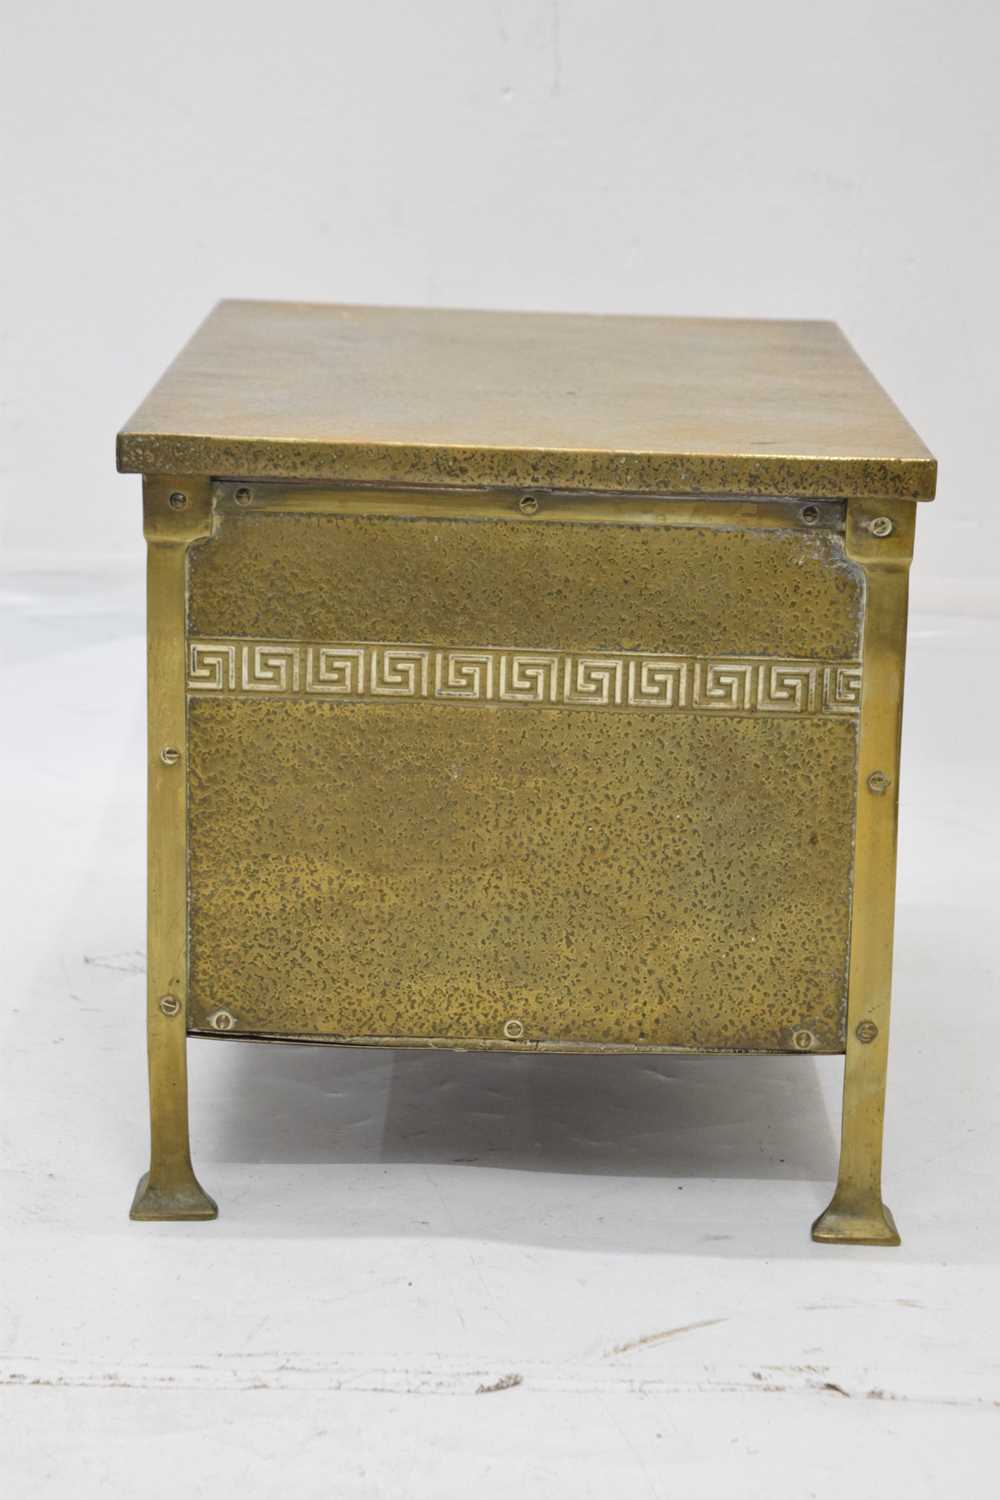 Early 20th century hammered brass coal/log bin - Image 3 of 7